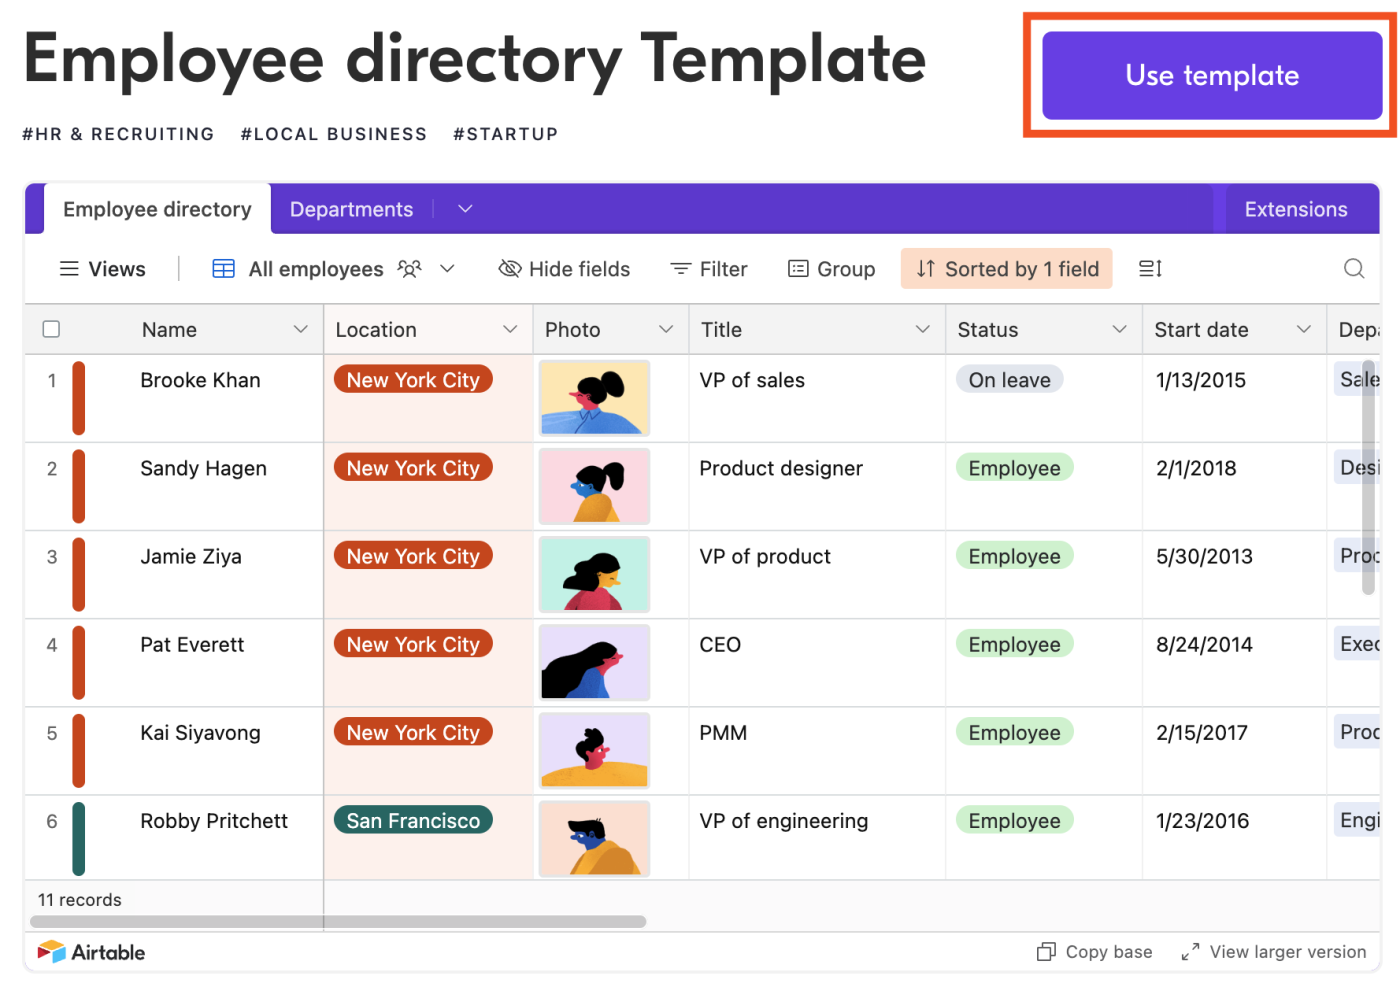 Employee directory template in Airtable.